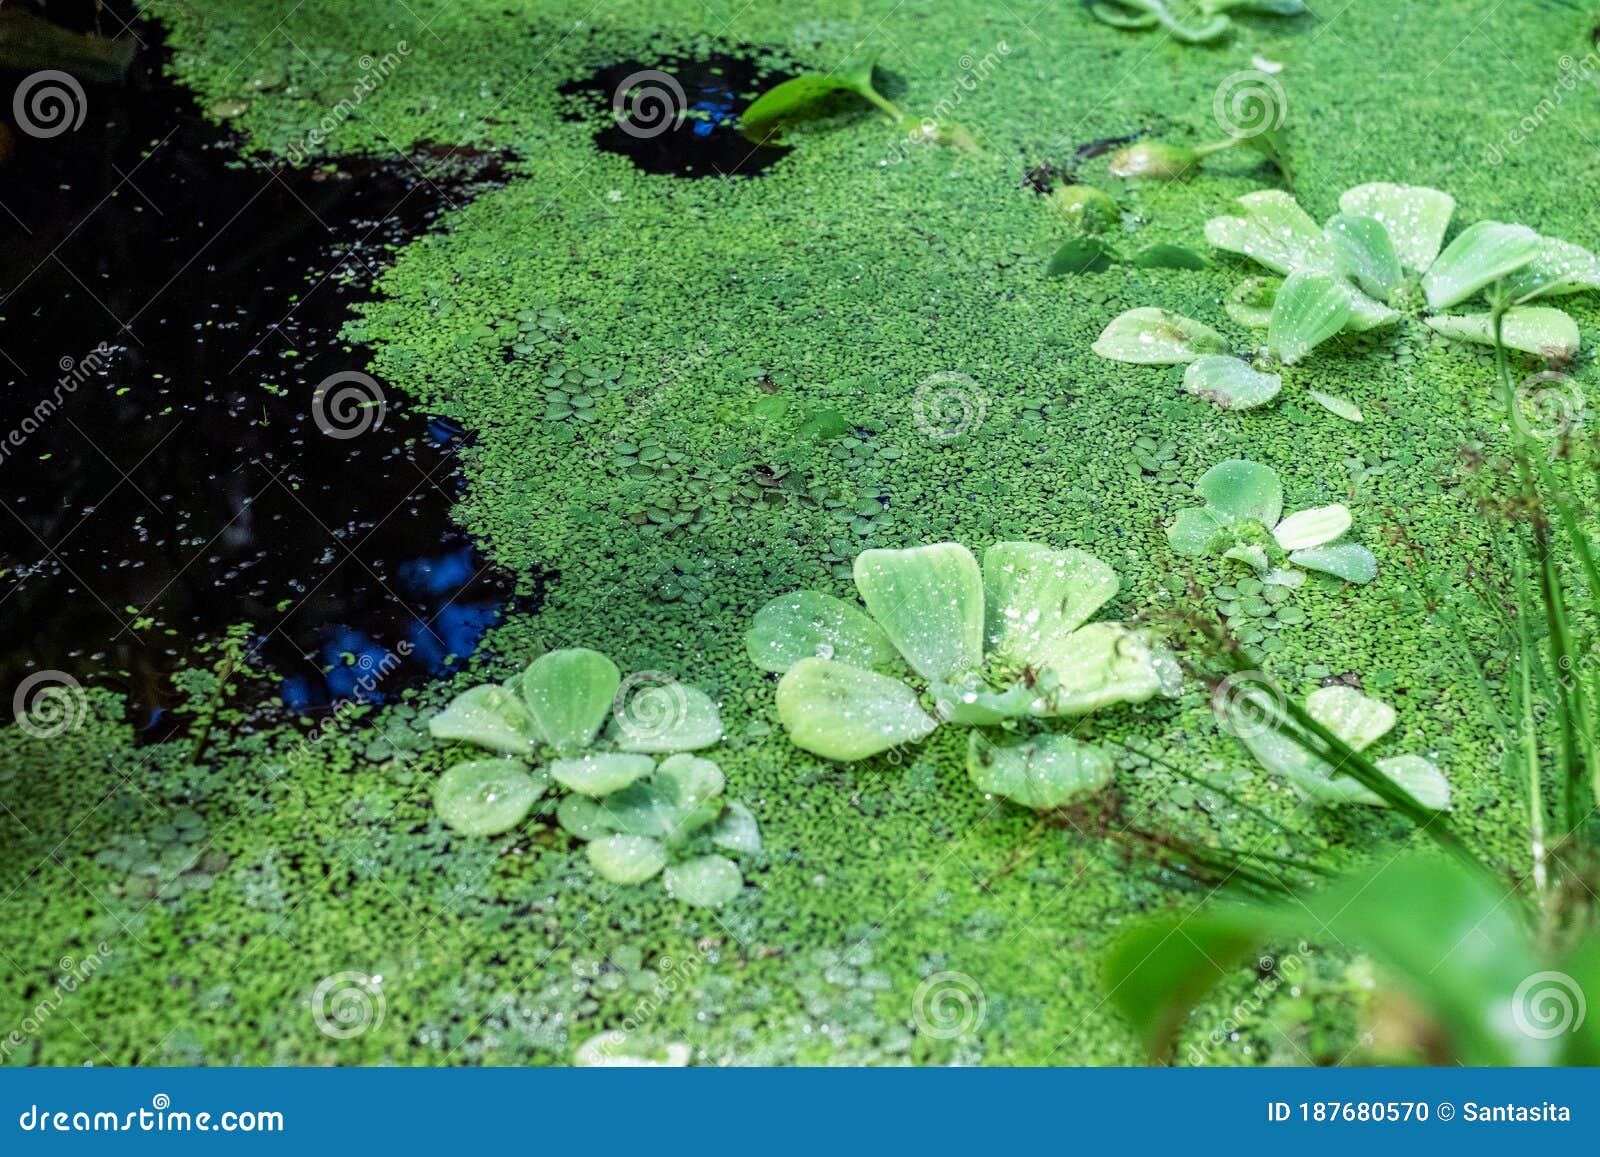 nenufar in the waterbodies, the flora in the pond, water lilies and other plants living in the water